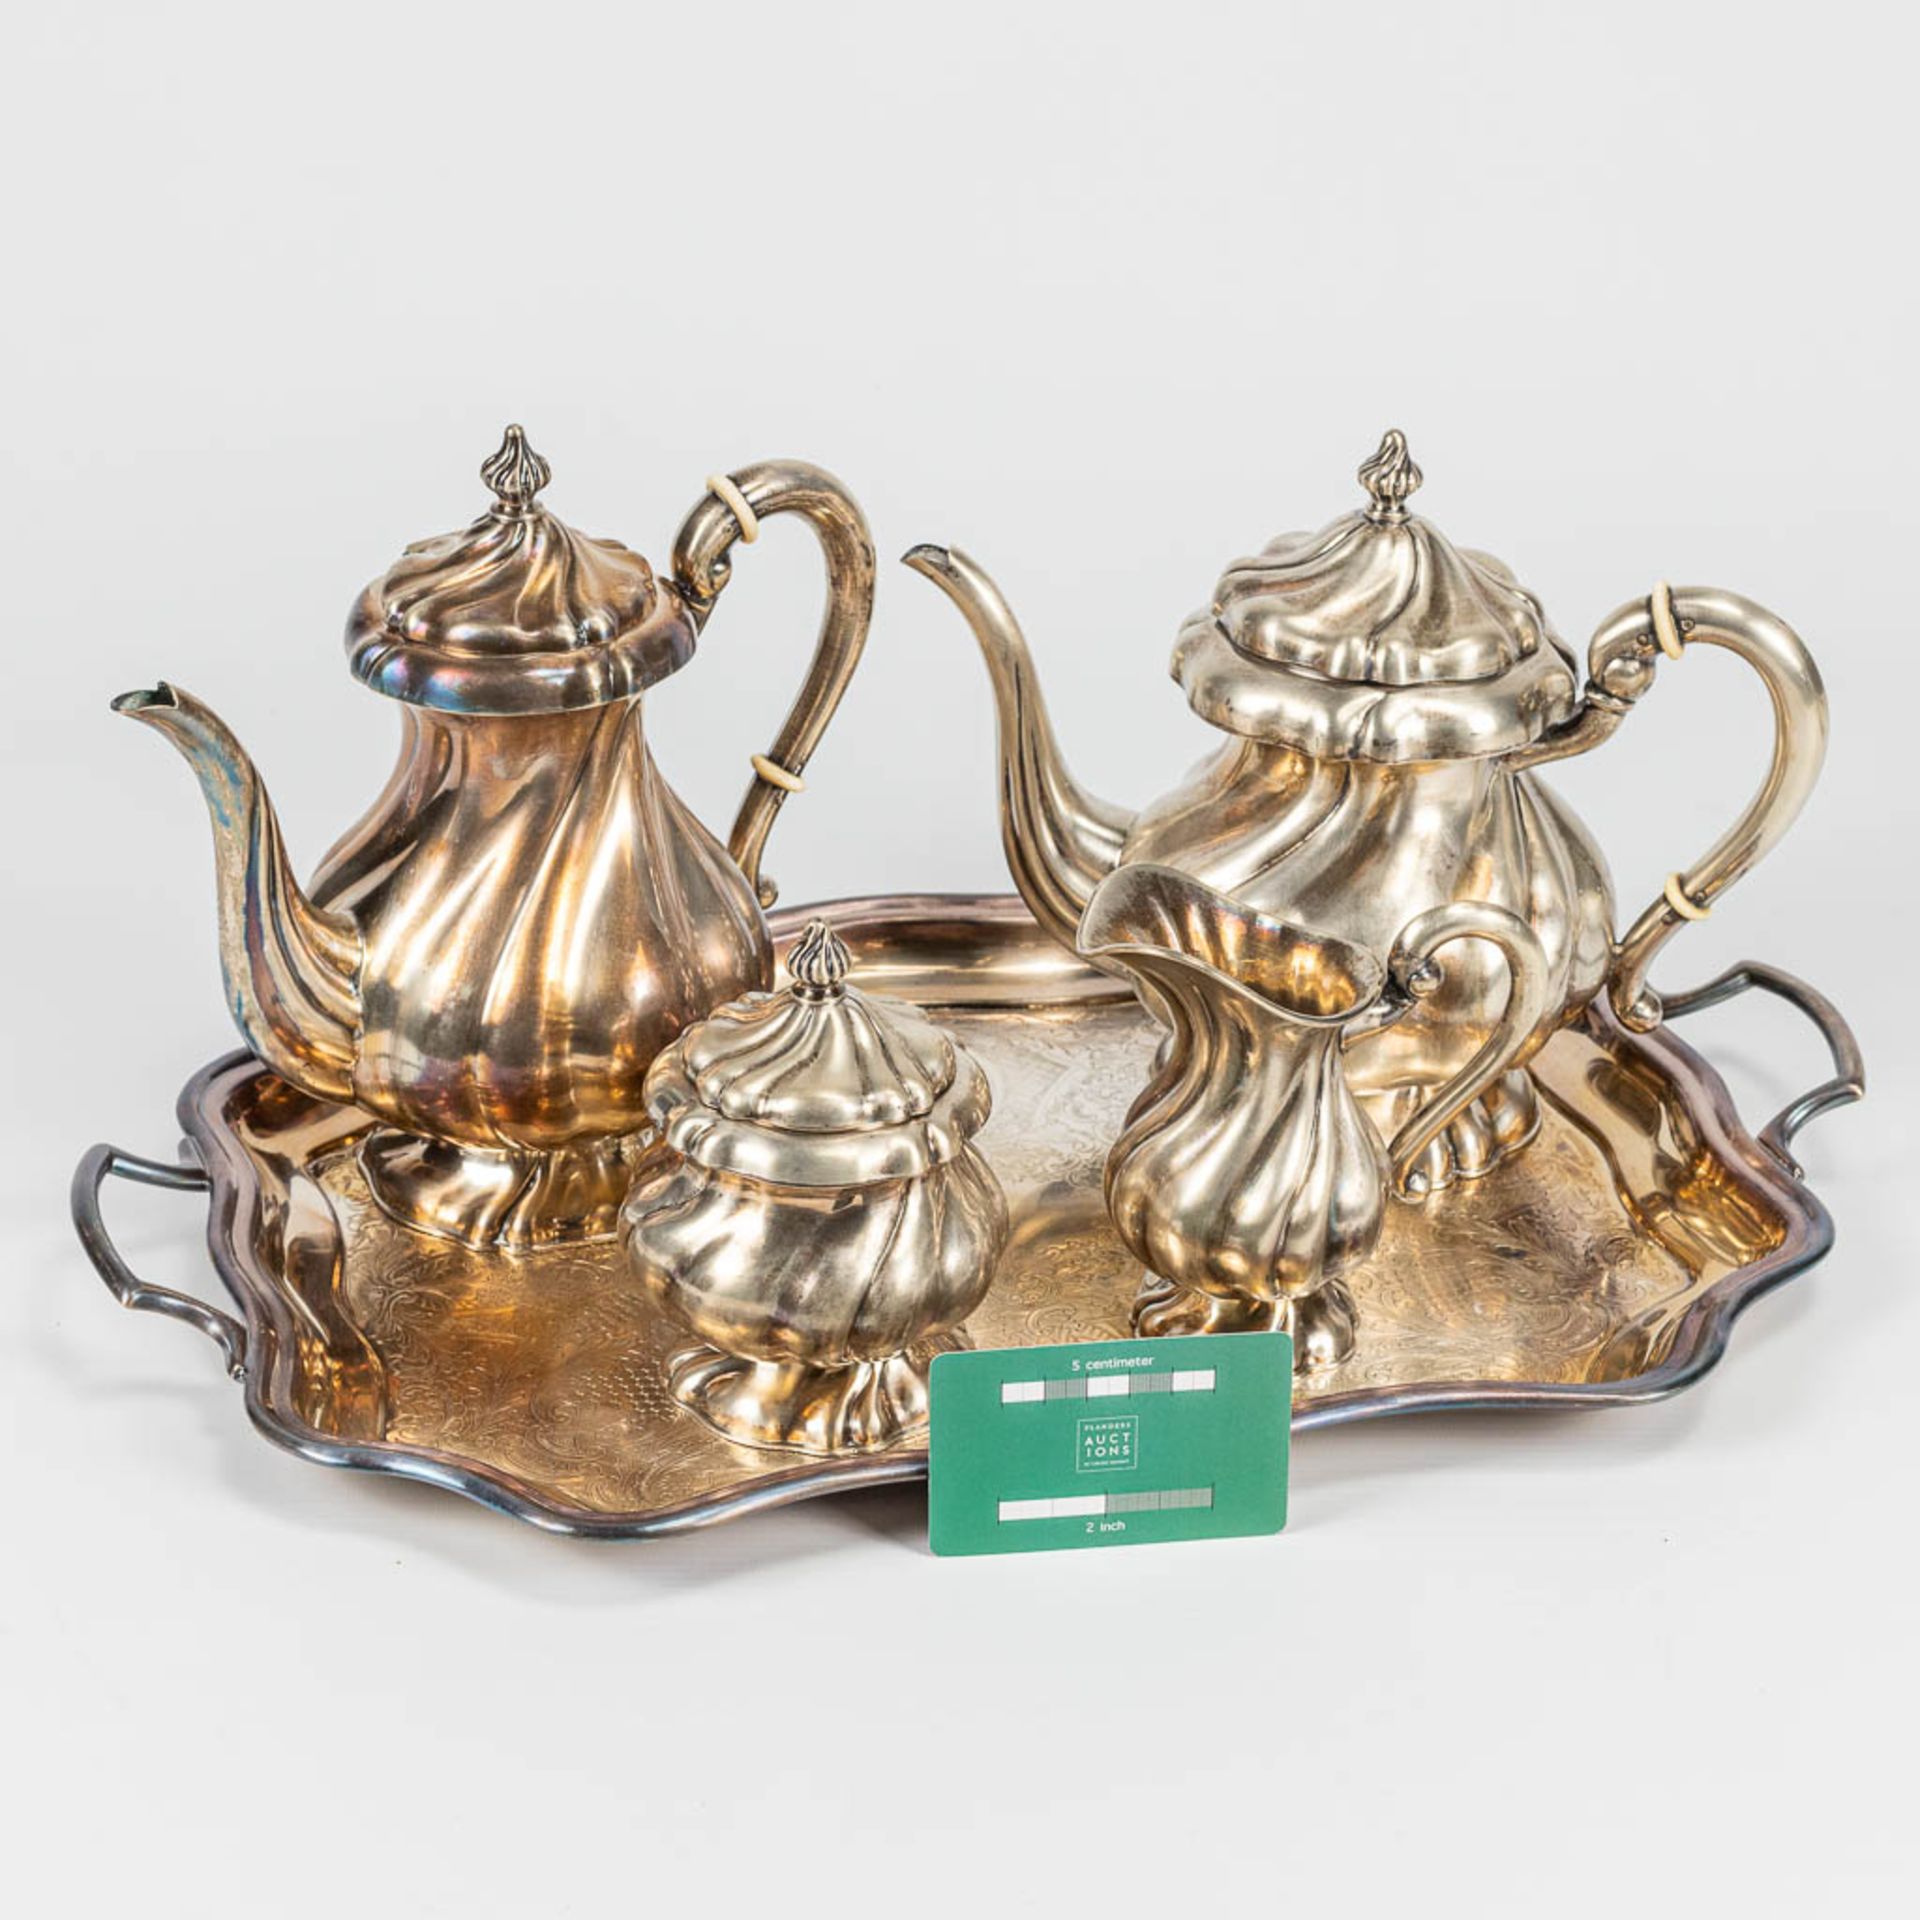 A 4-piece coffee and tea service made of silver on a silver-plated tray. - Image 11 of 14